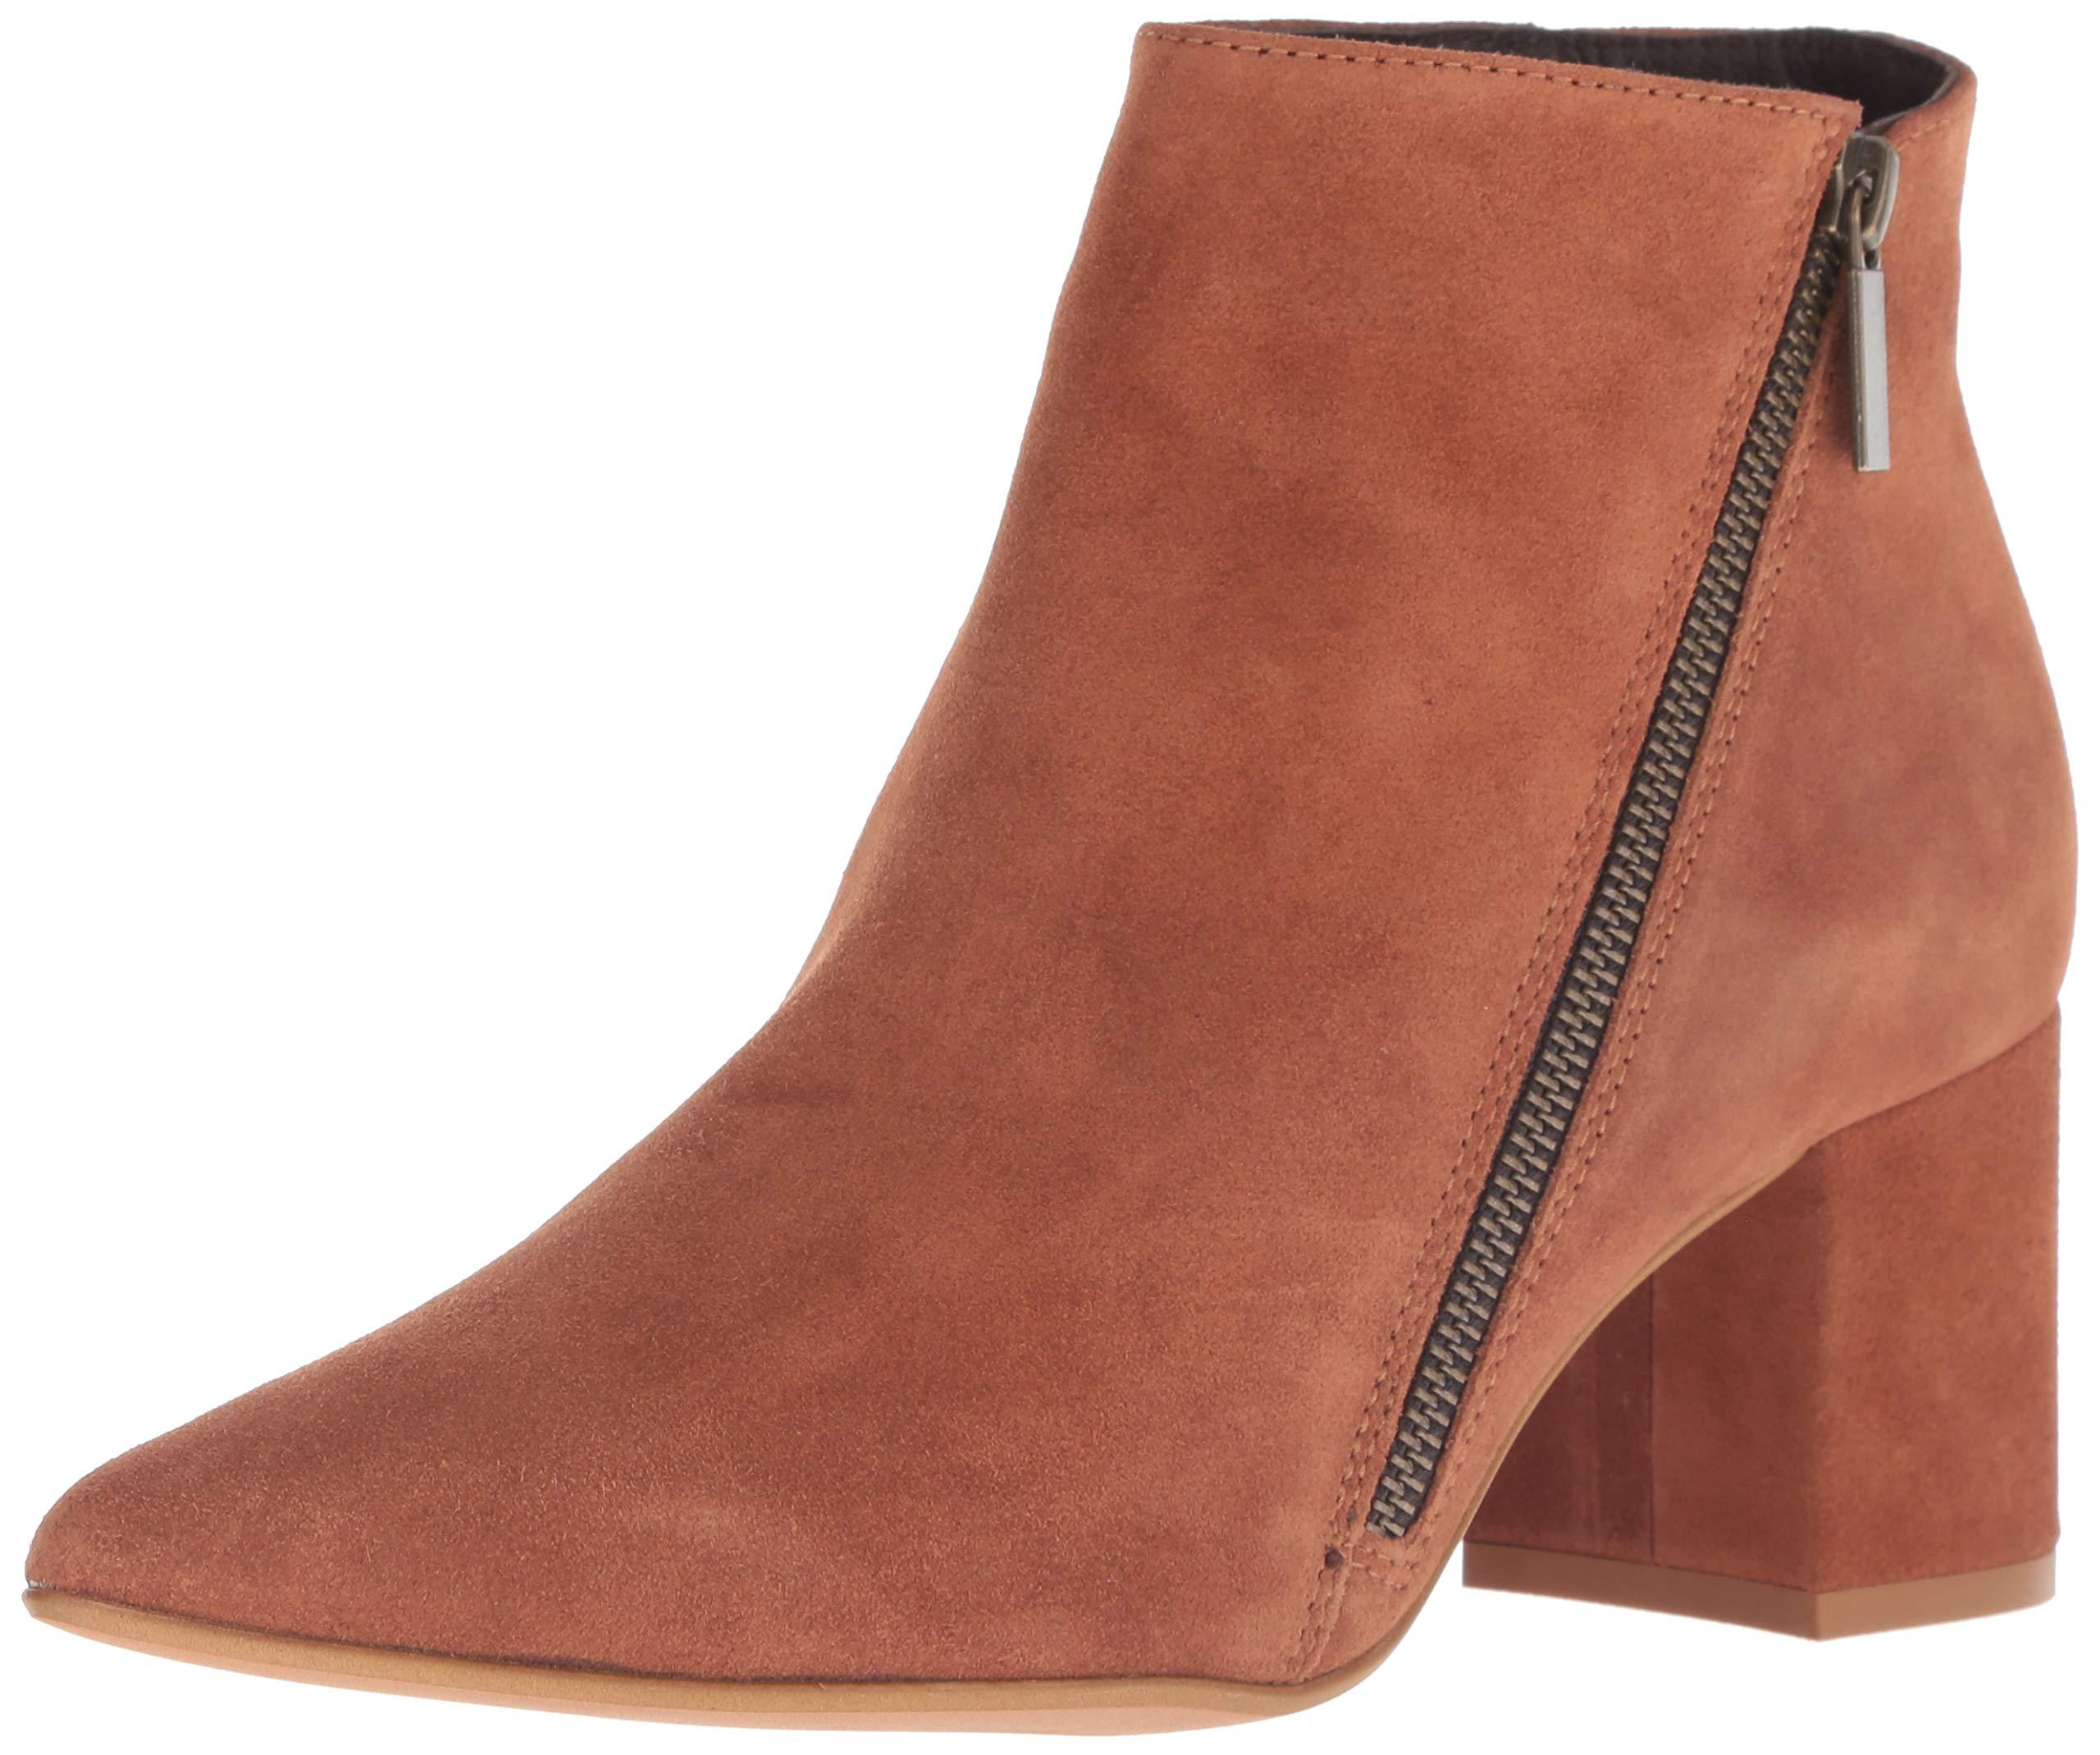 clarks brown diagonal zipped ankle boots